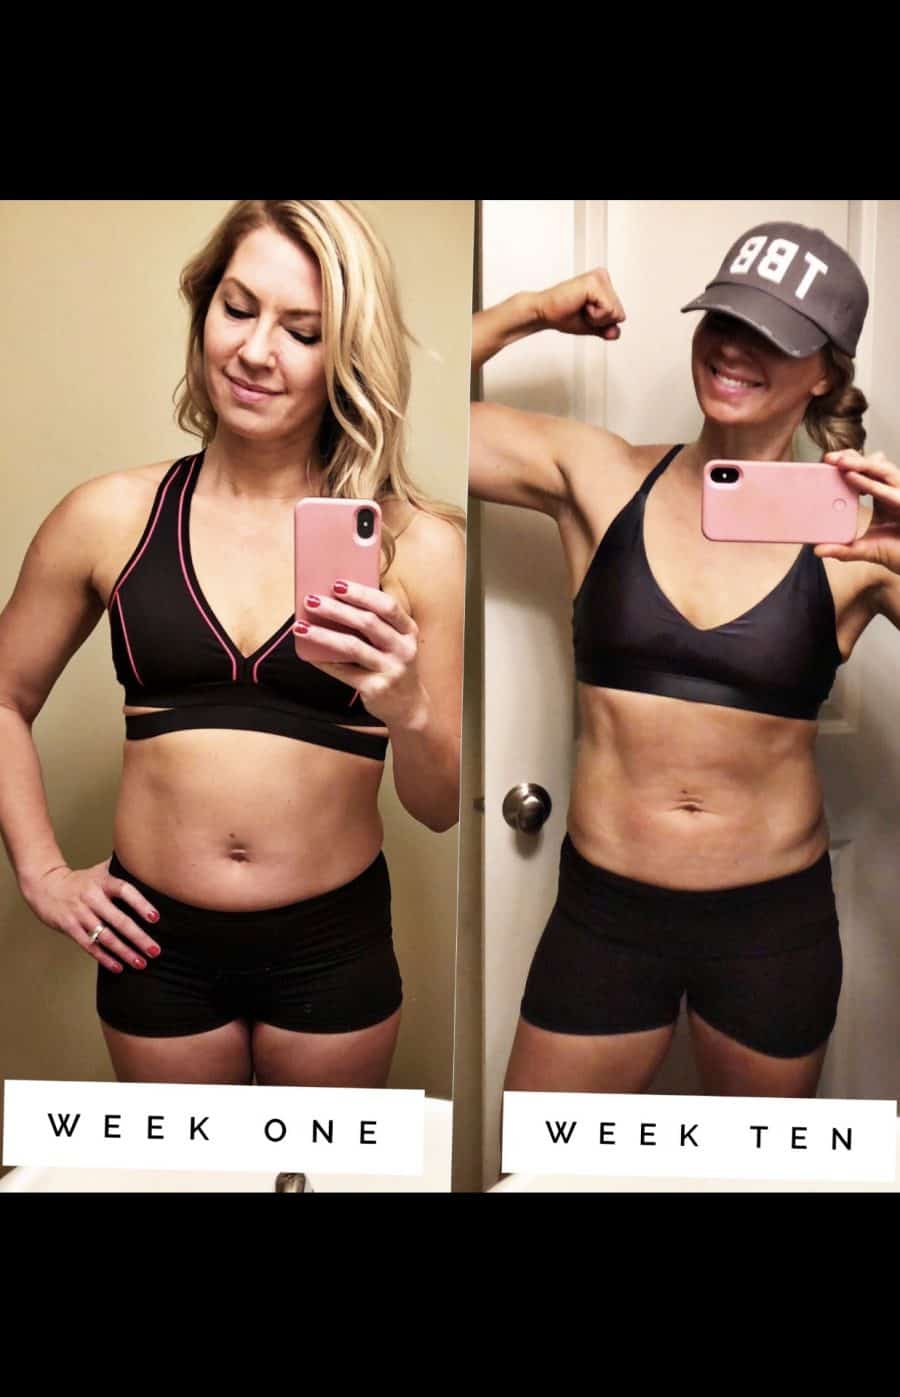 Week 10 | 80 Day Obsession Review,80 day obsession, 80 day obsession review, 80 day obsession fit mom, Fit mom 80 day obsession, Best 80 day obsession transformation, 80 day obsession transformation, 80 day obsession mom, 80 day obsession moms, Review of 80 day obsession, Lose weight with 80 day obsession, How 80 day obsession works